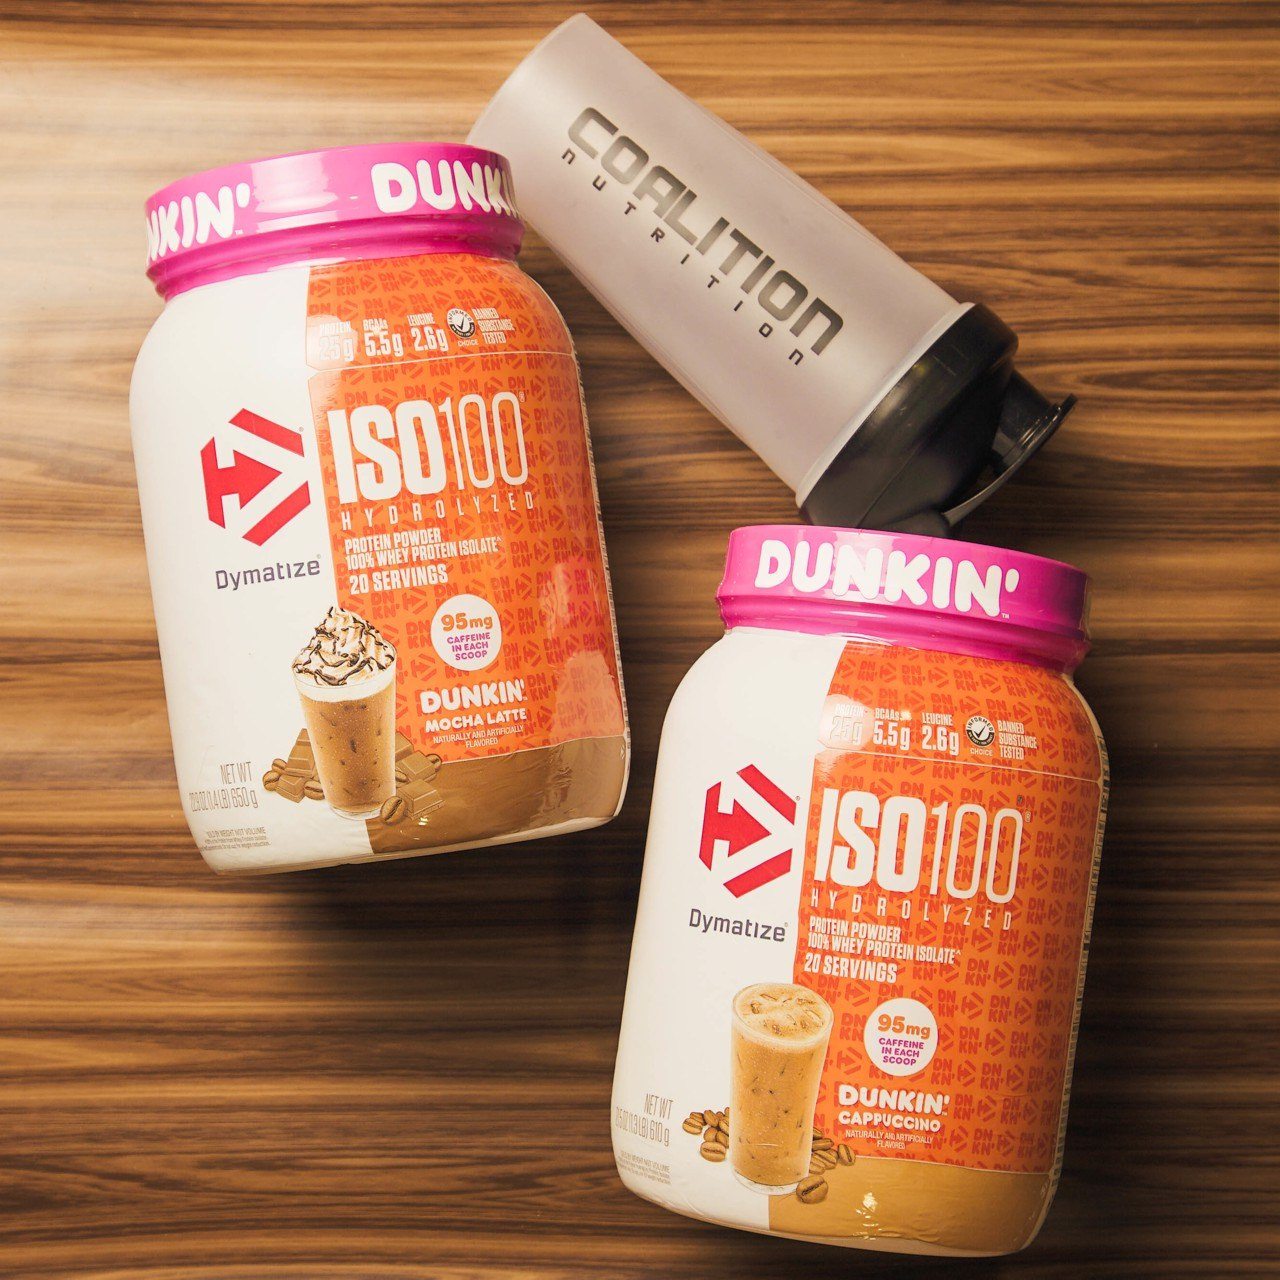 Dymatize Iso 100 Dunkin' Donuts Editions Coalition Nutrition